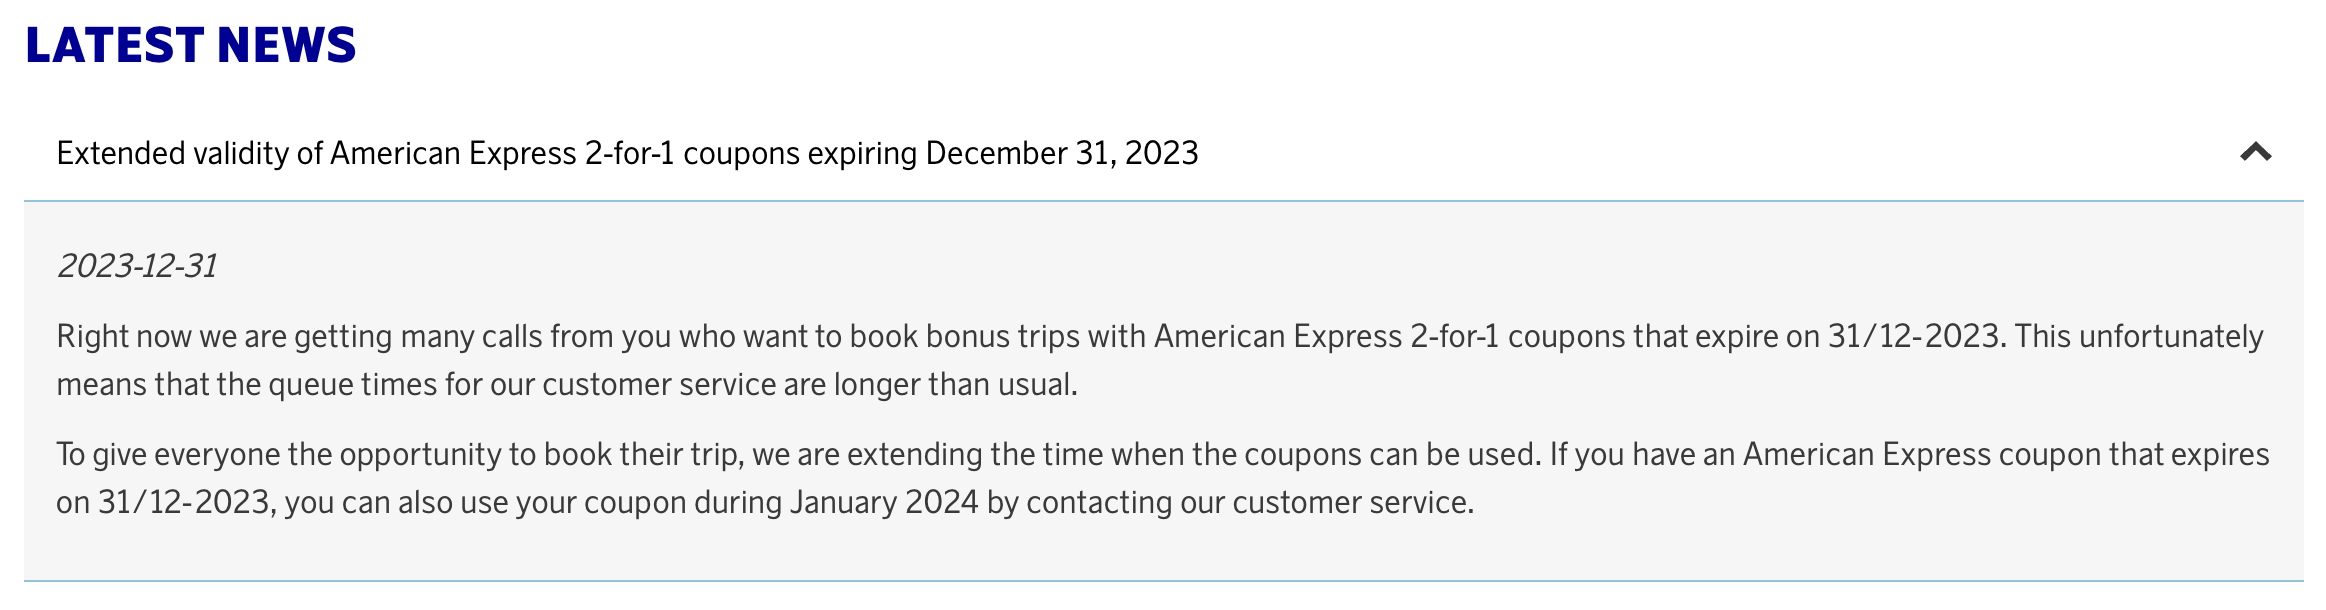 SAS extended the deadlines of the Amex 2-4-1 vouchers (companion tickets) until January 31st, 2024..